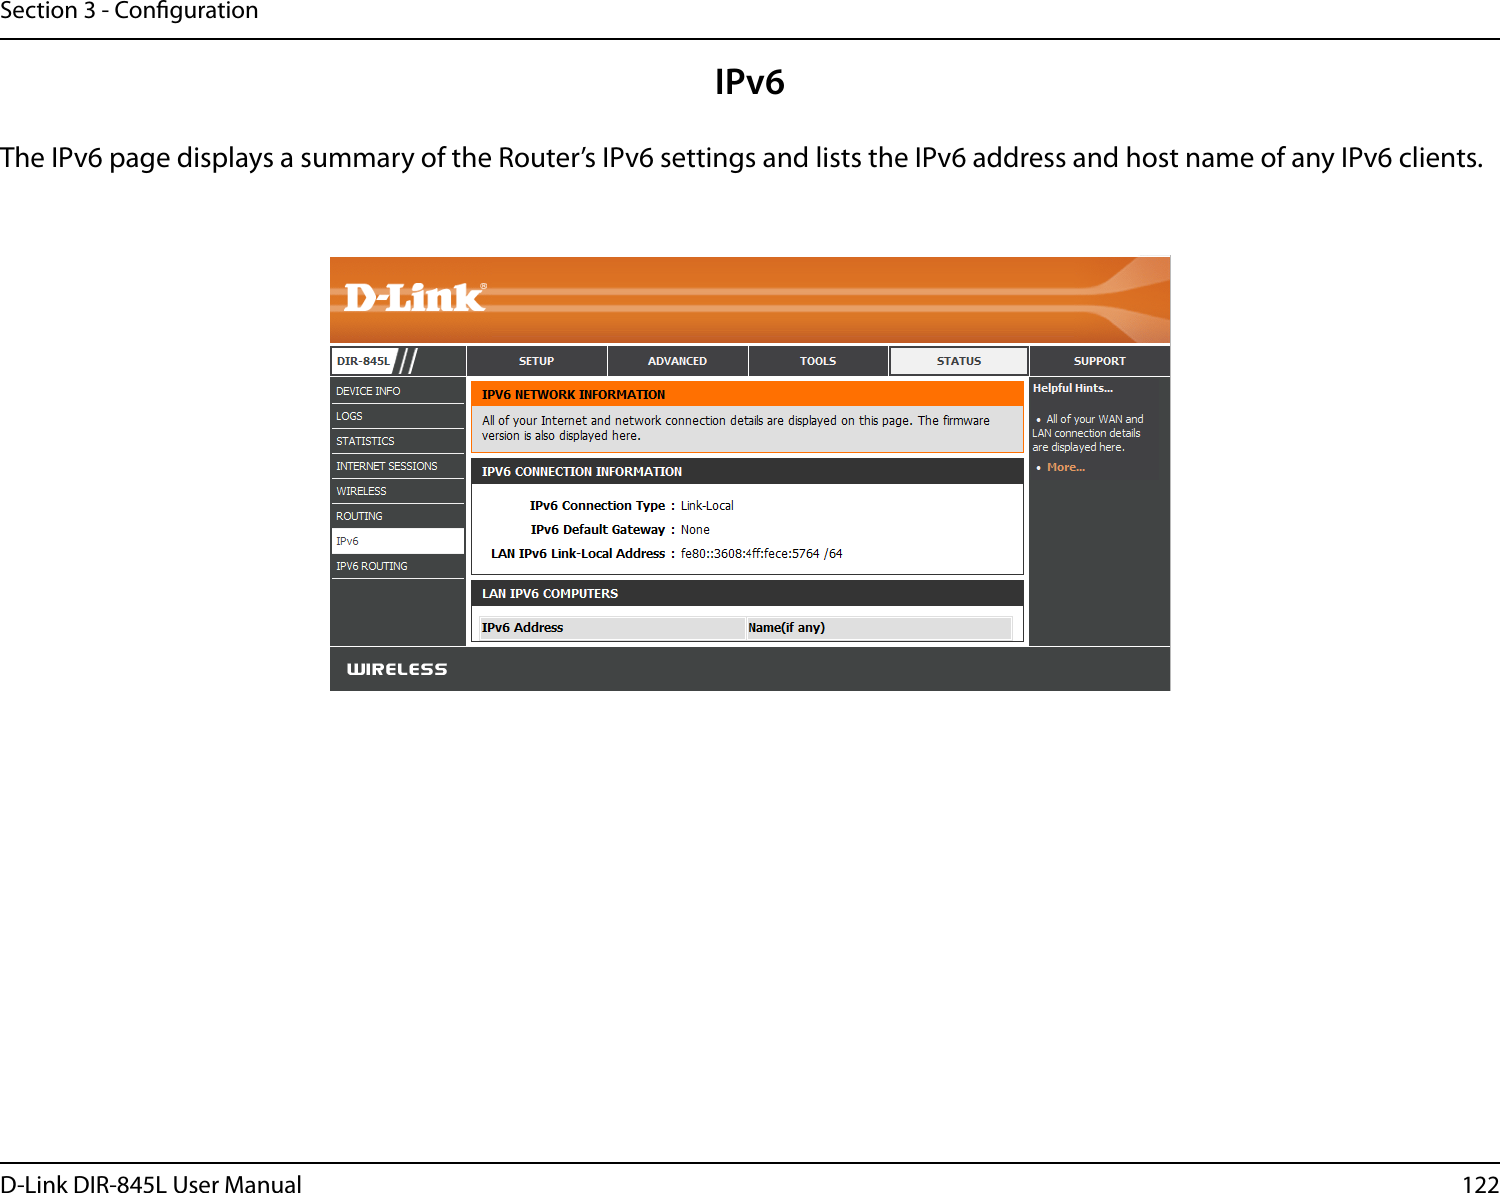 122D-Link DIR-845L User ManualSection 3 - CongurationIPv6The IPv6 page displays a summary of the Router’s IPv6 settings and lists the IPv6 address and host name of any IPv6 clients. 